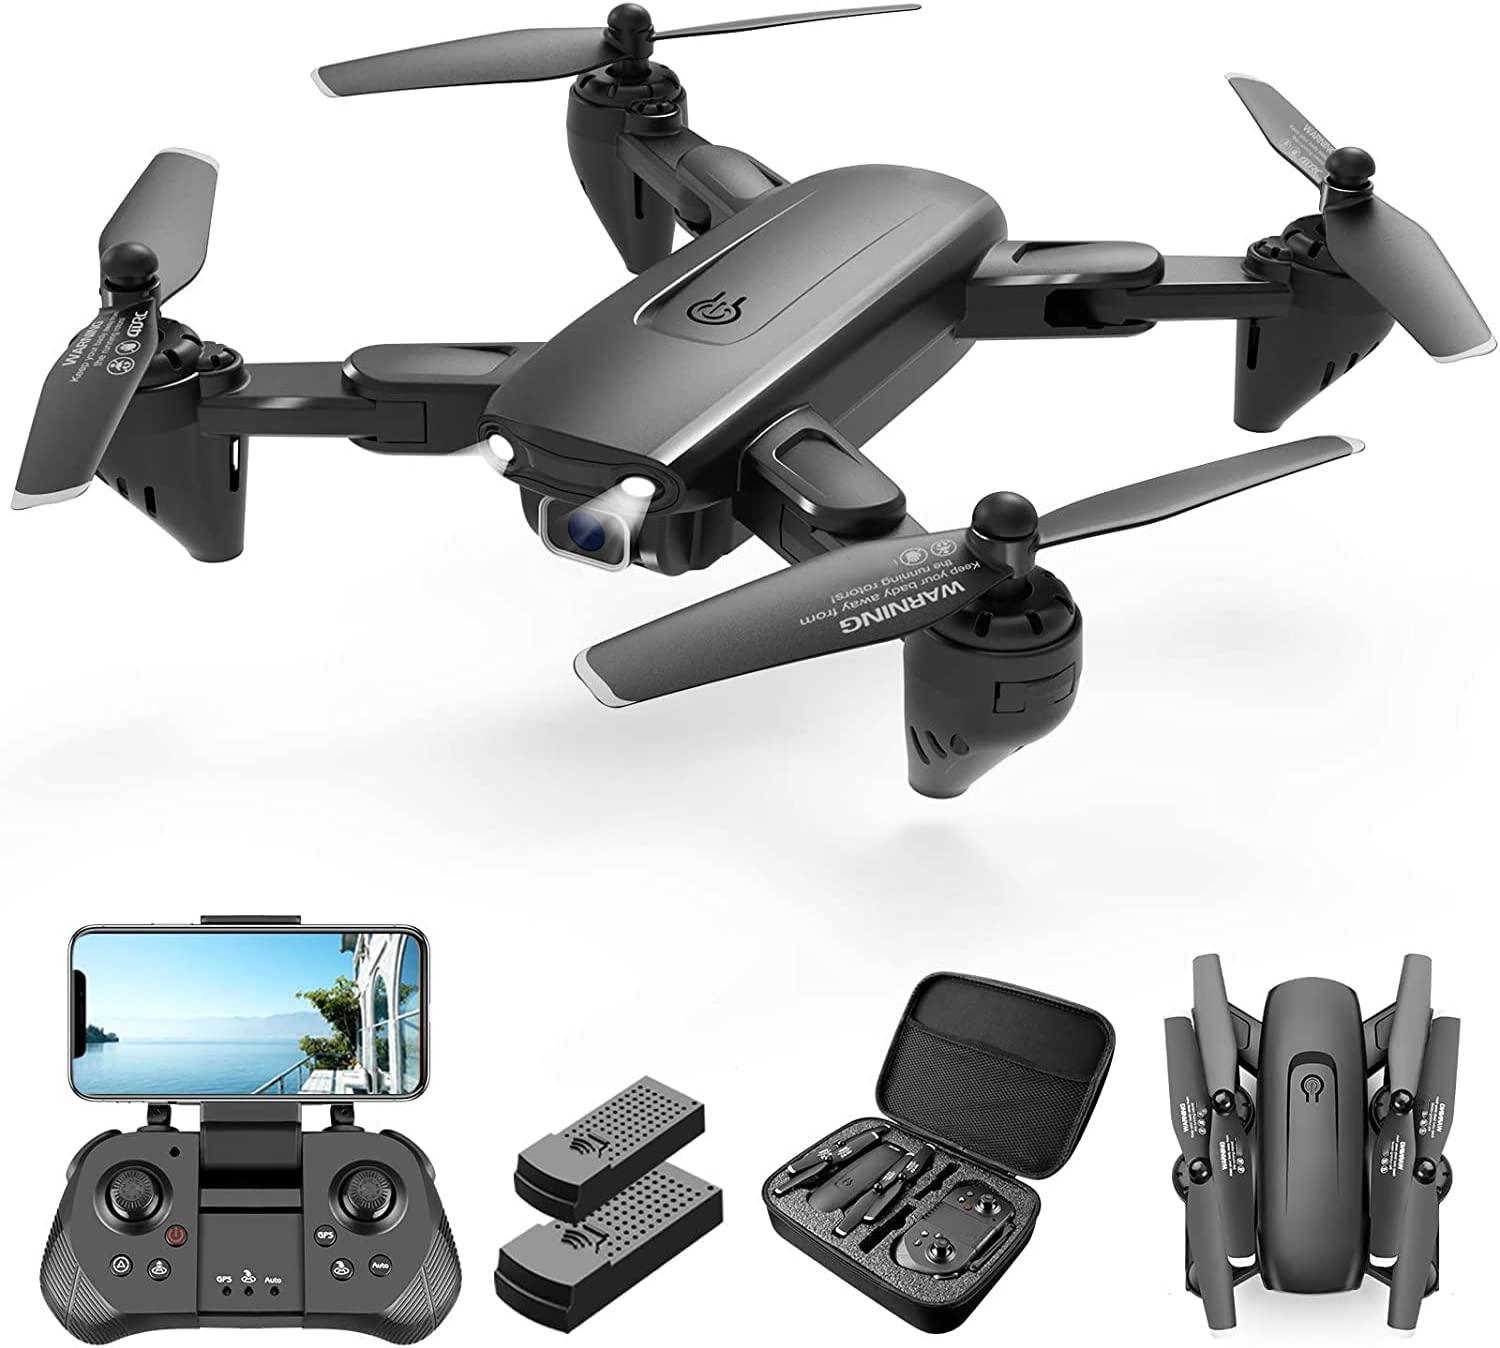 GPS Drone with 4K 120°FOV Camera for Adults, 5G WIFI FPV Live Video  Foldable RC Drone Quadcopter for Beginners, GPS Return home, 1200mAh Long  Flight